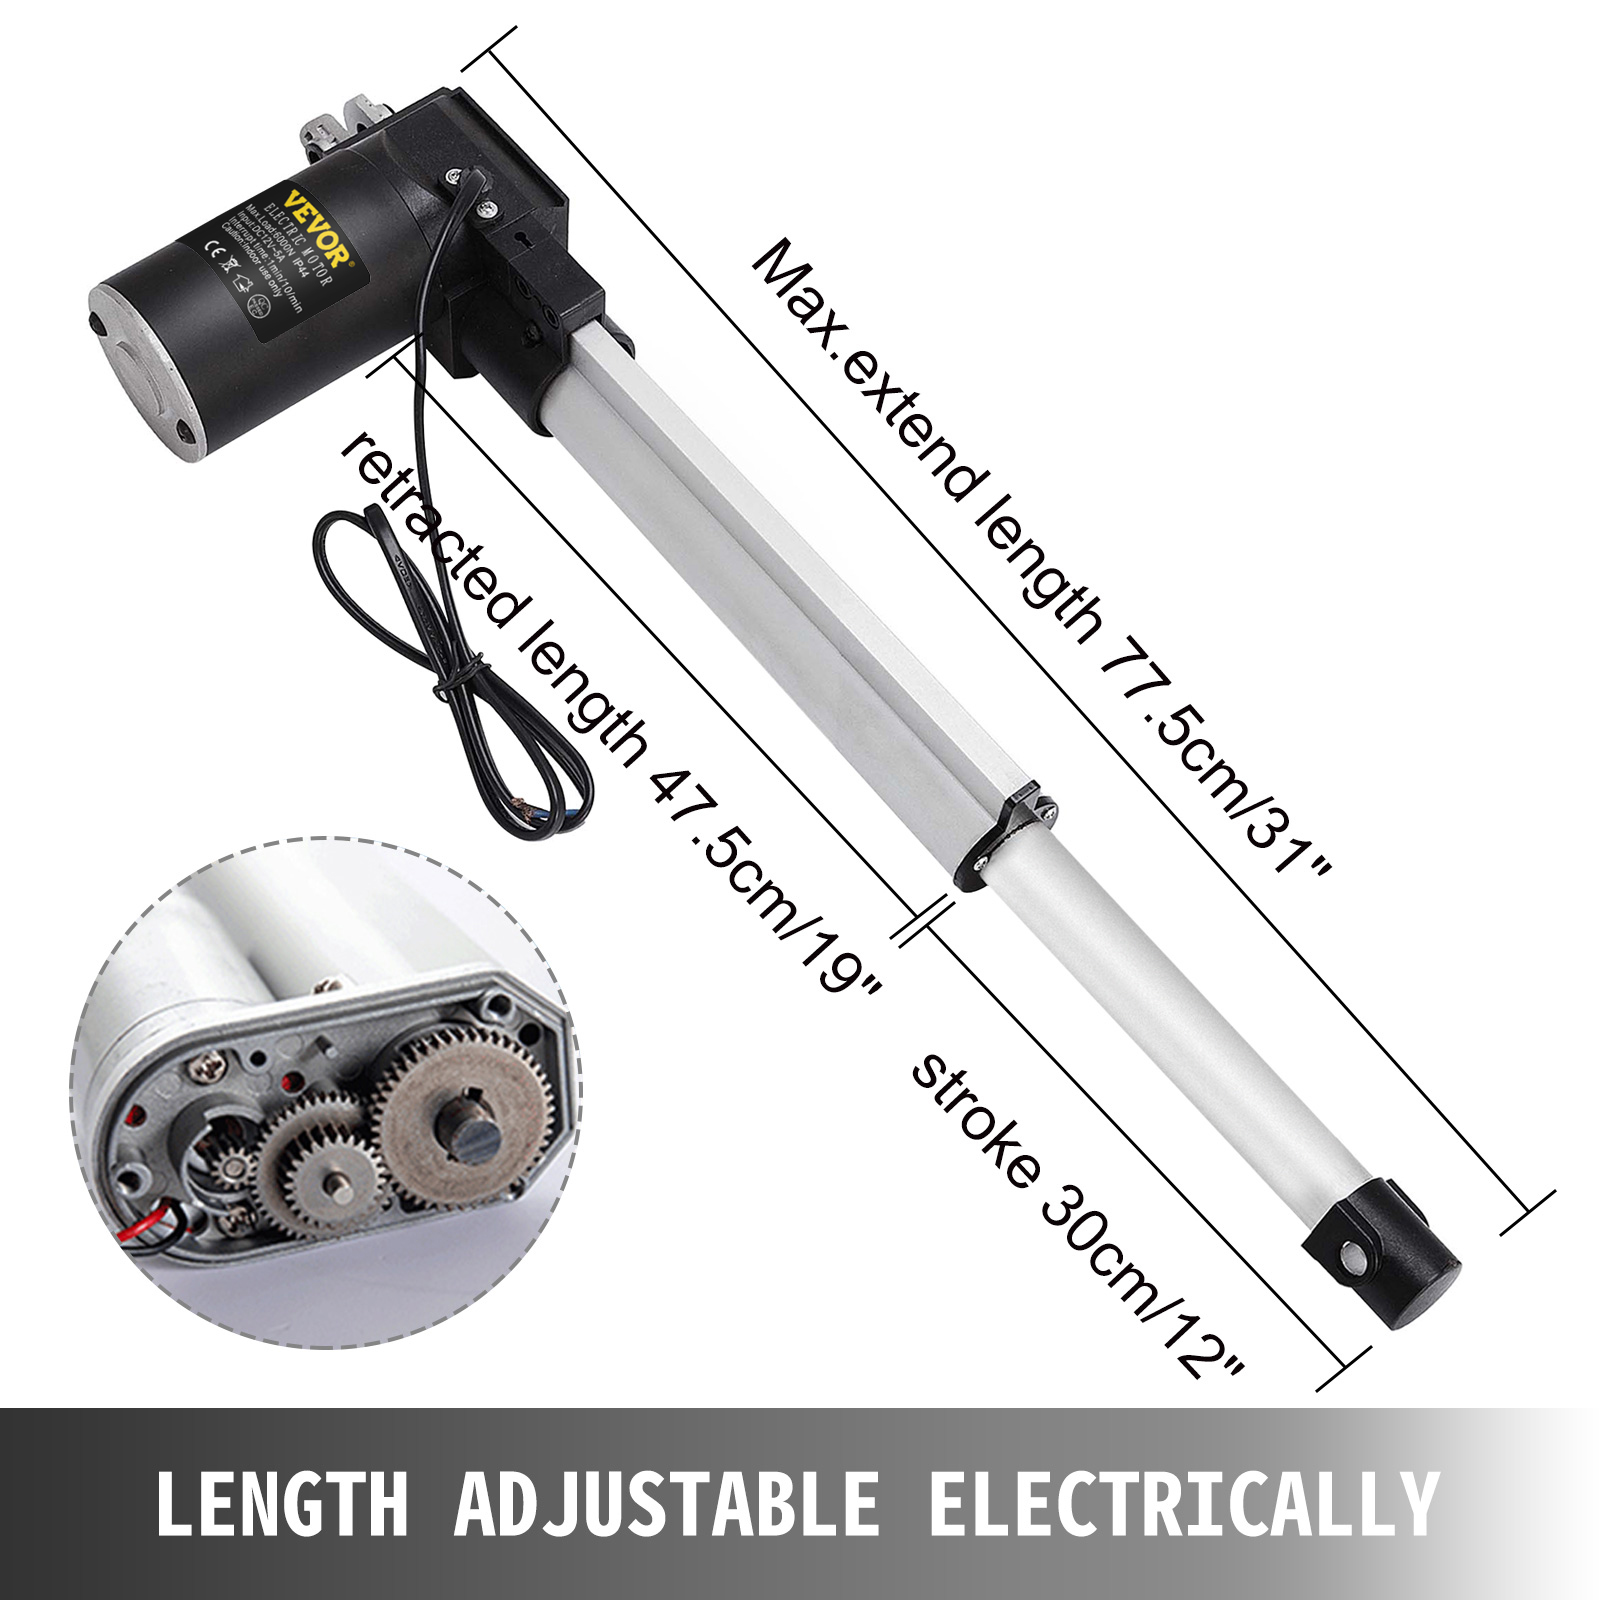 Details about   22/28 Inch Stroke Linear Actuator 6000N/1320lbs Pound Max Lift 12V DC Motor US 